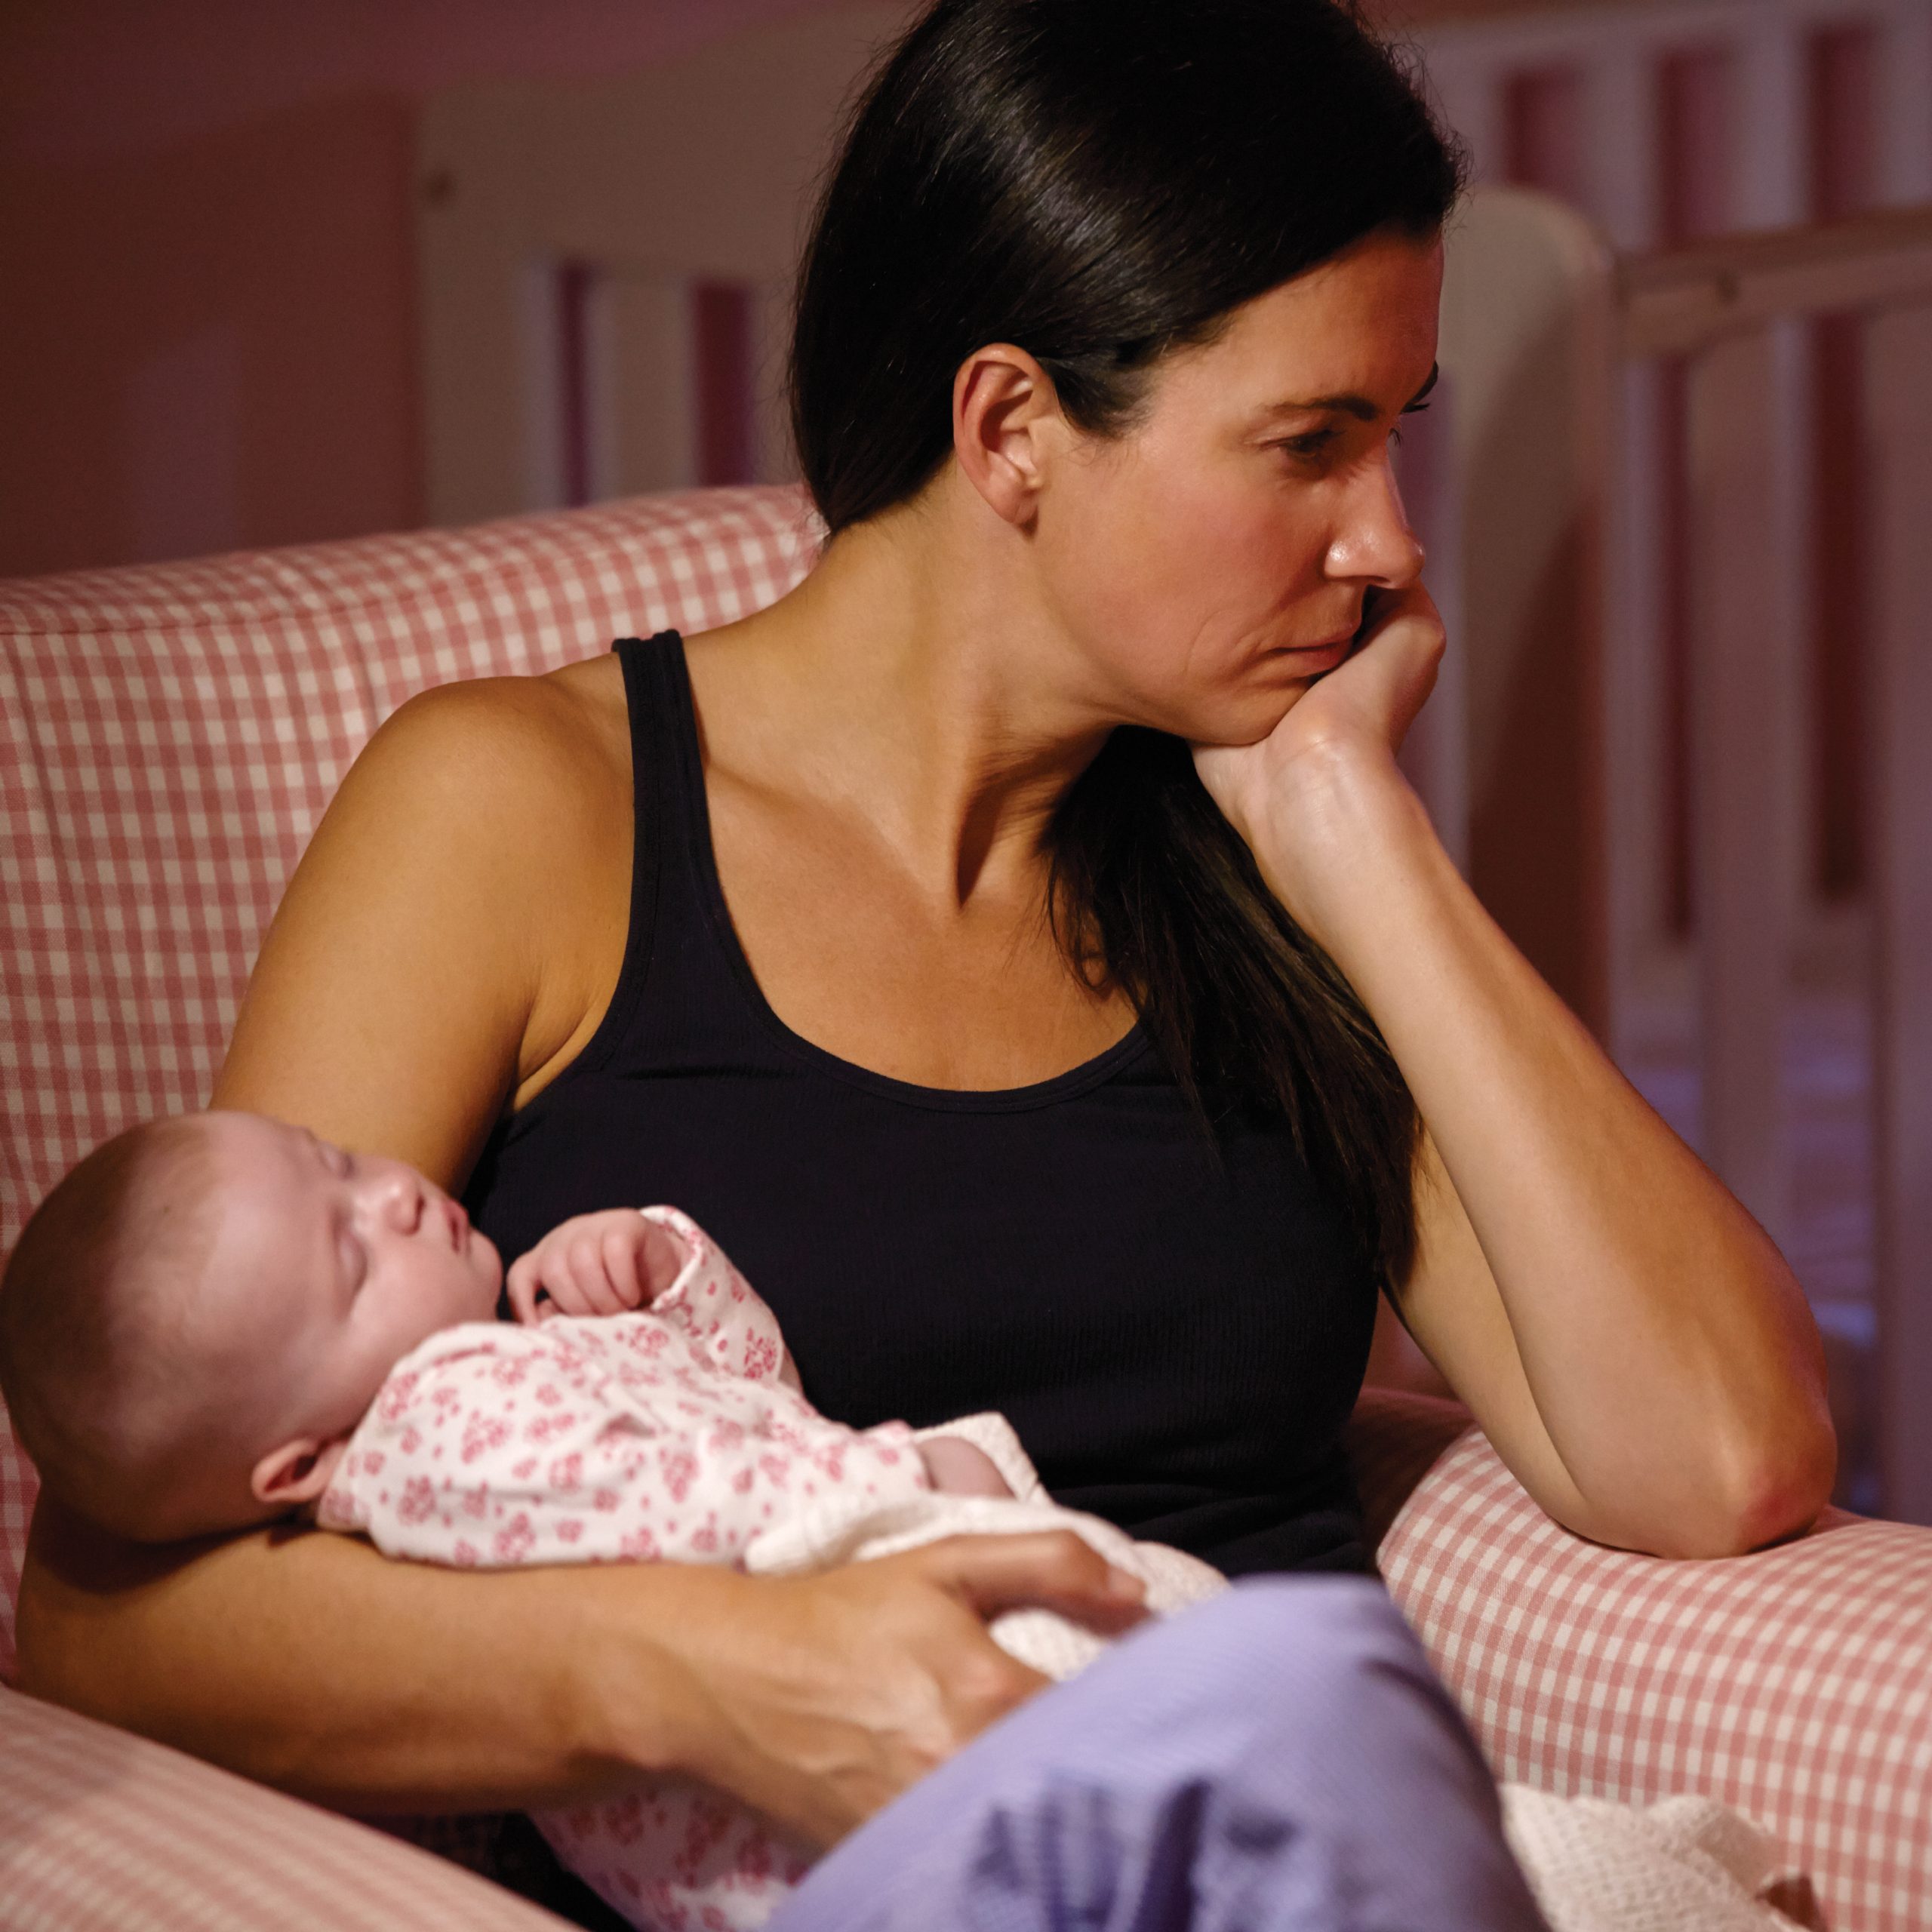 Mother holding baby and looking depressed